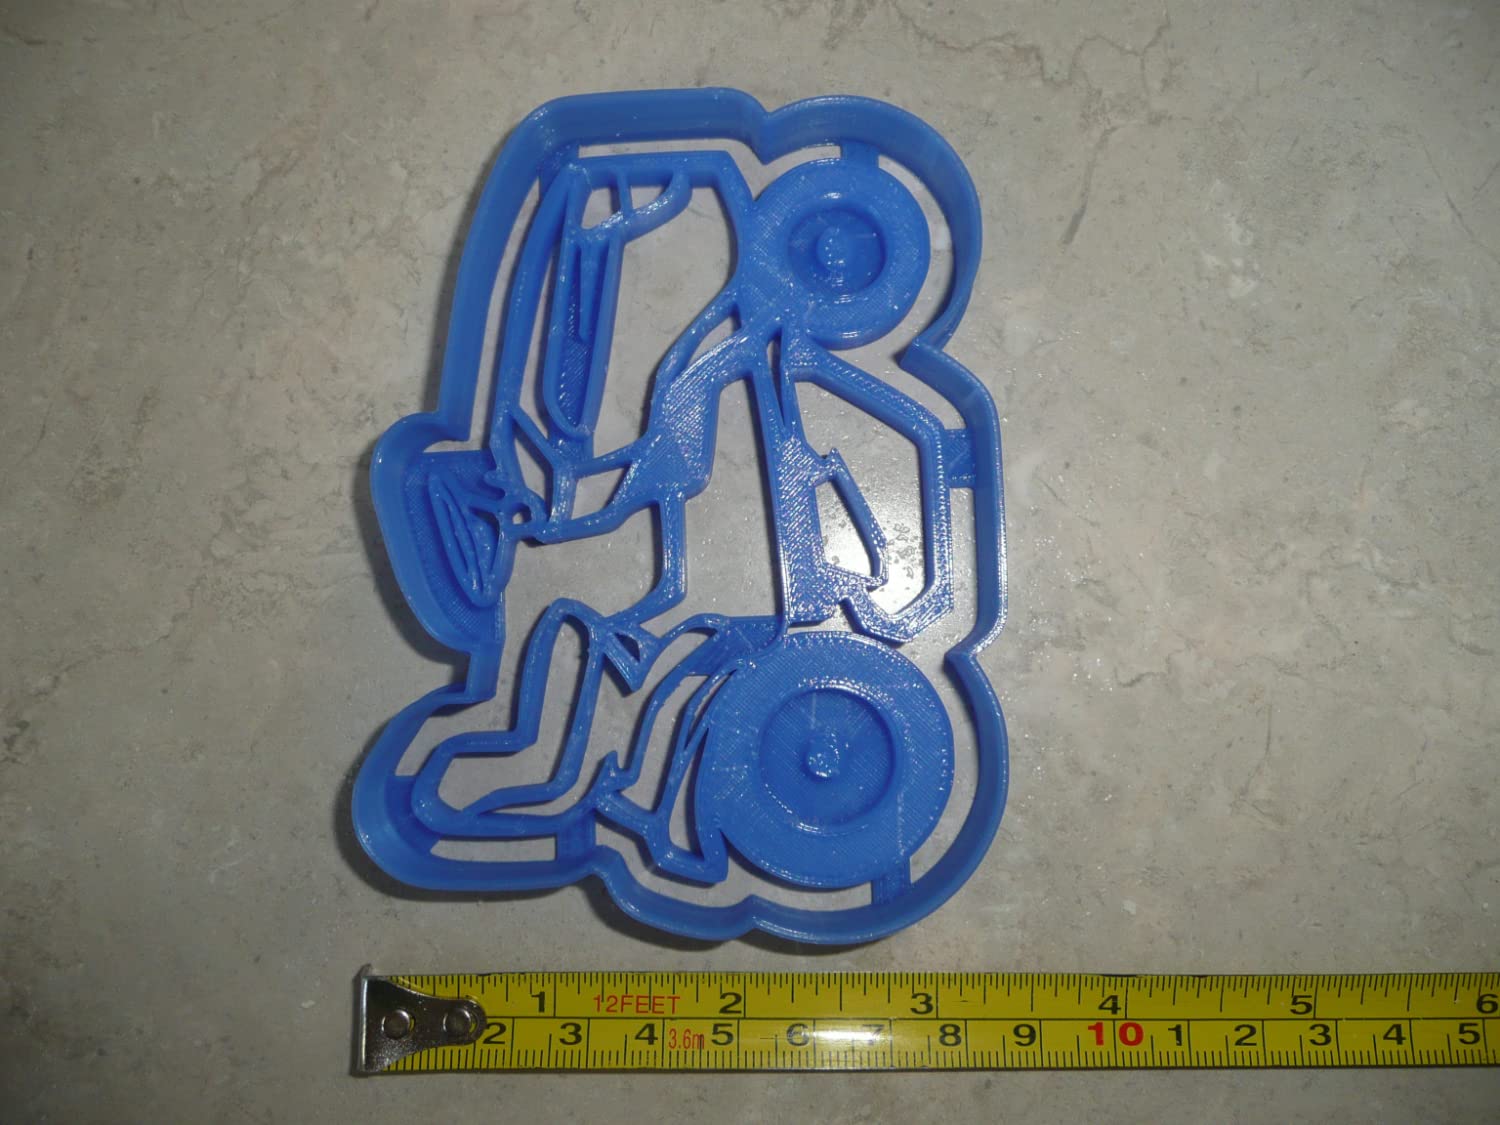 YNGLLC RIDER RIDING MOWER LAWN CARE YARD LANDSCAPING EQUIPMENT COOKIE CUTTER MADE IN USA PR4672, Blue